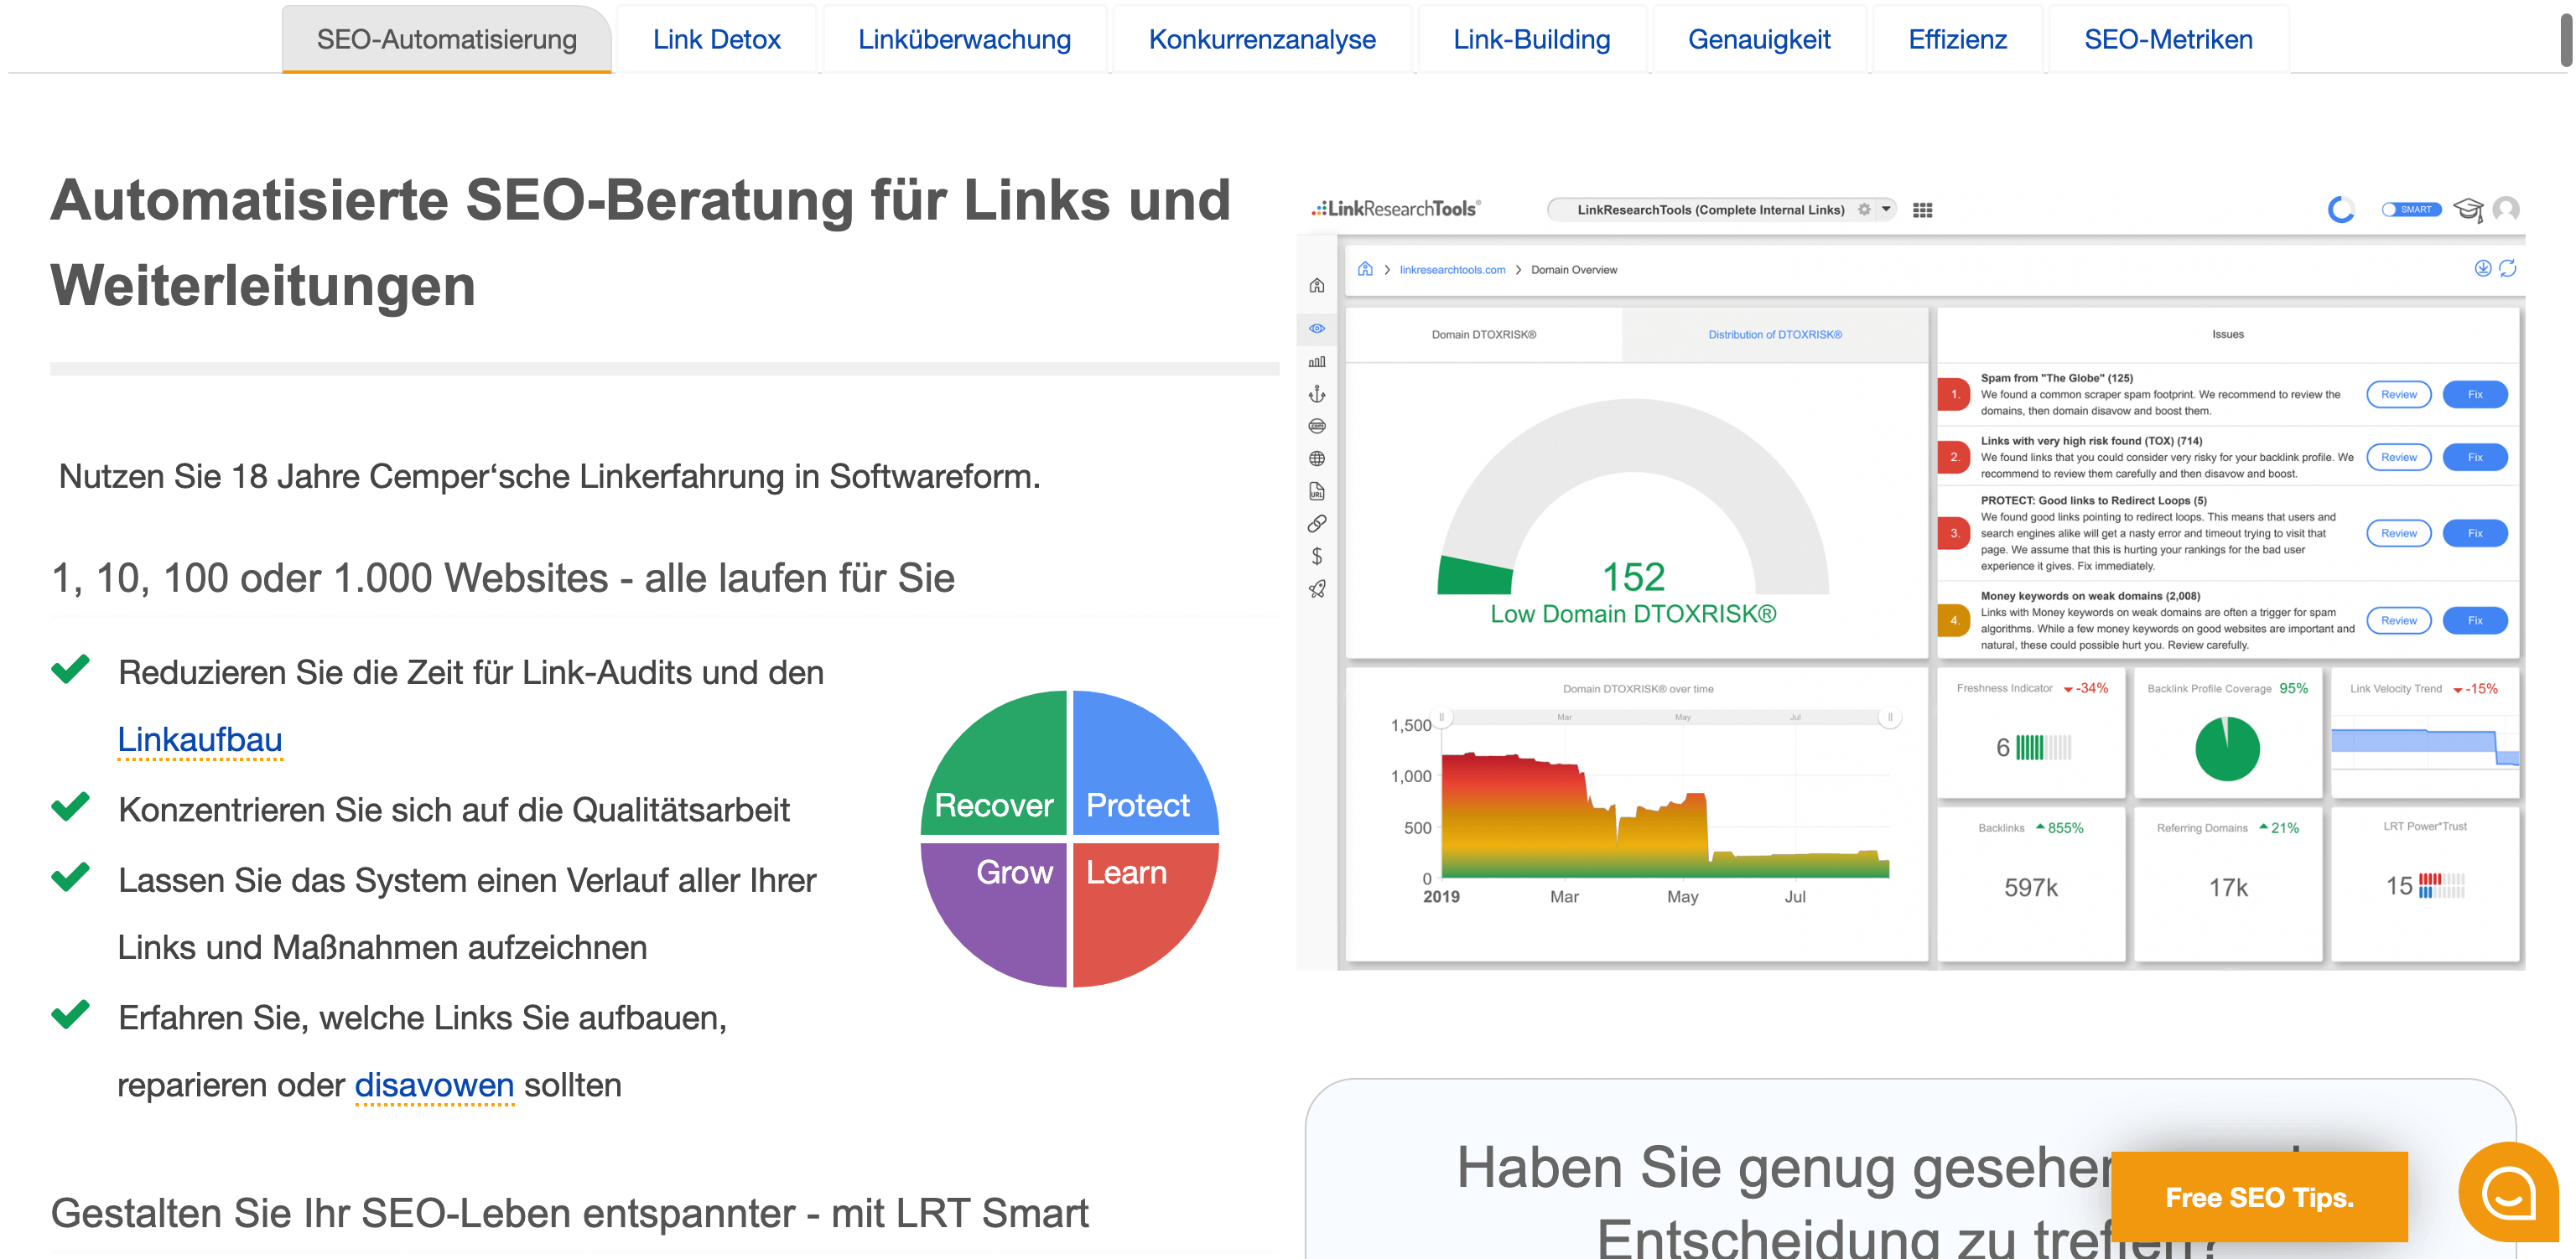 Die Link Research Tools. Professionelle Backlink-Software.